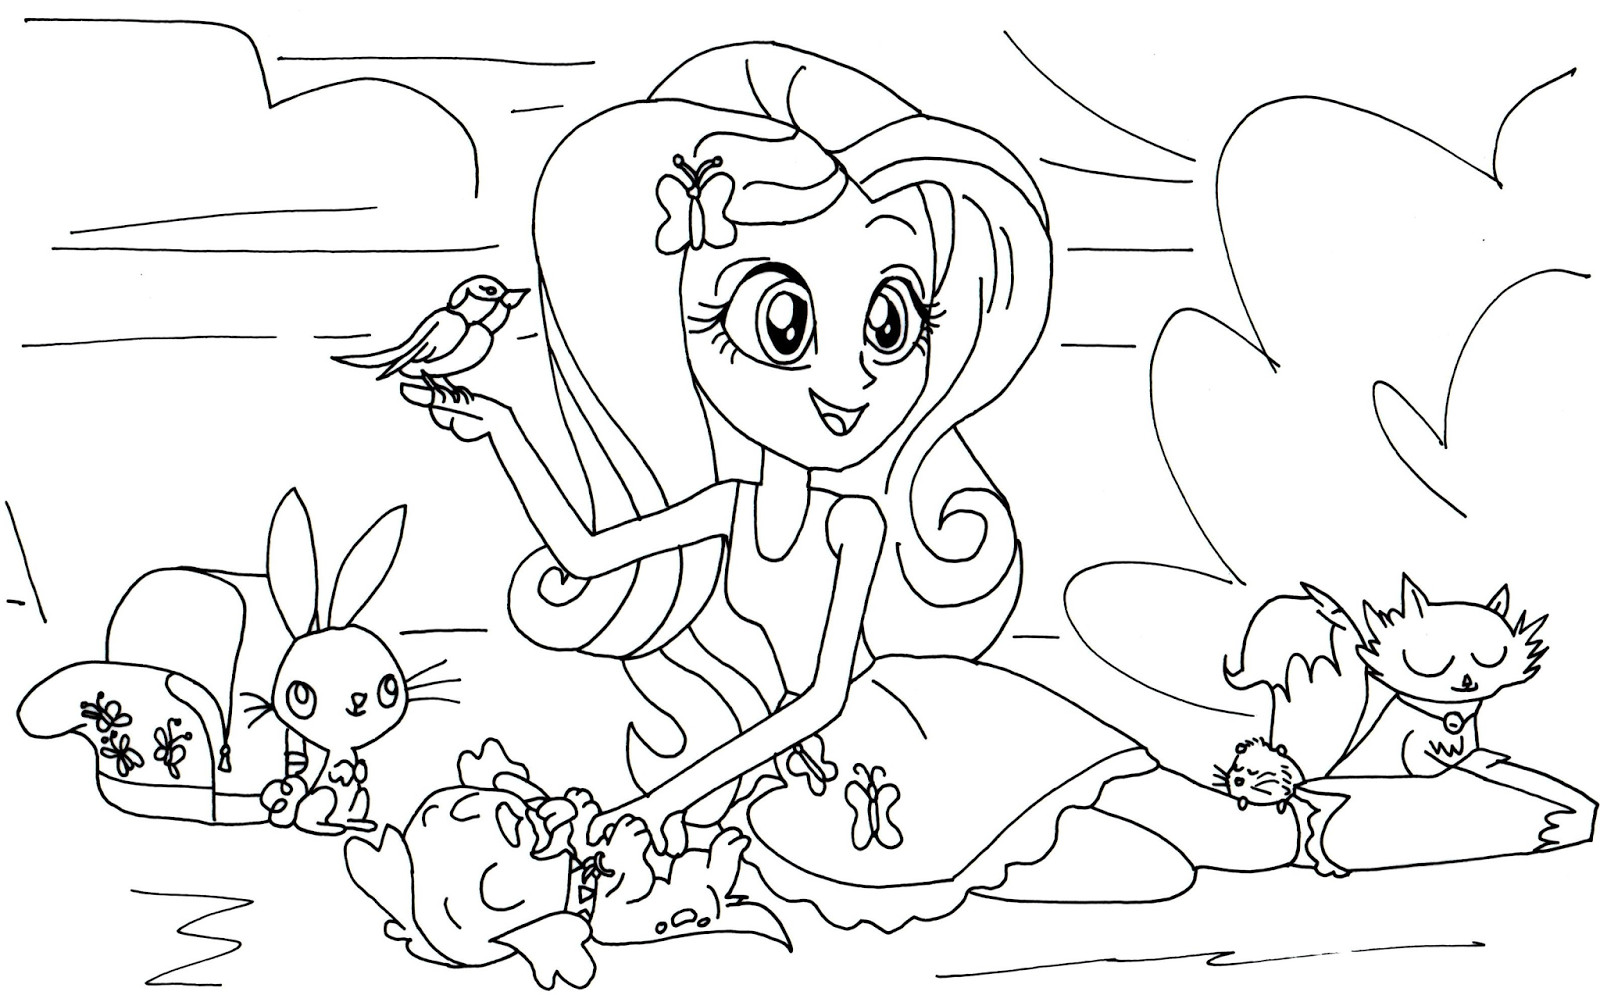 Equestria Girls Pinkie Pie Coloring Pages
 Free Printable My Little Pony Coloring Pages Fluttershy